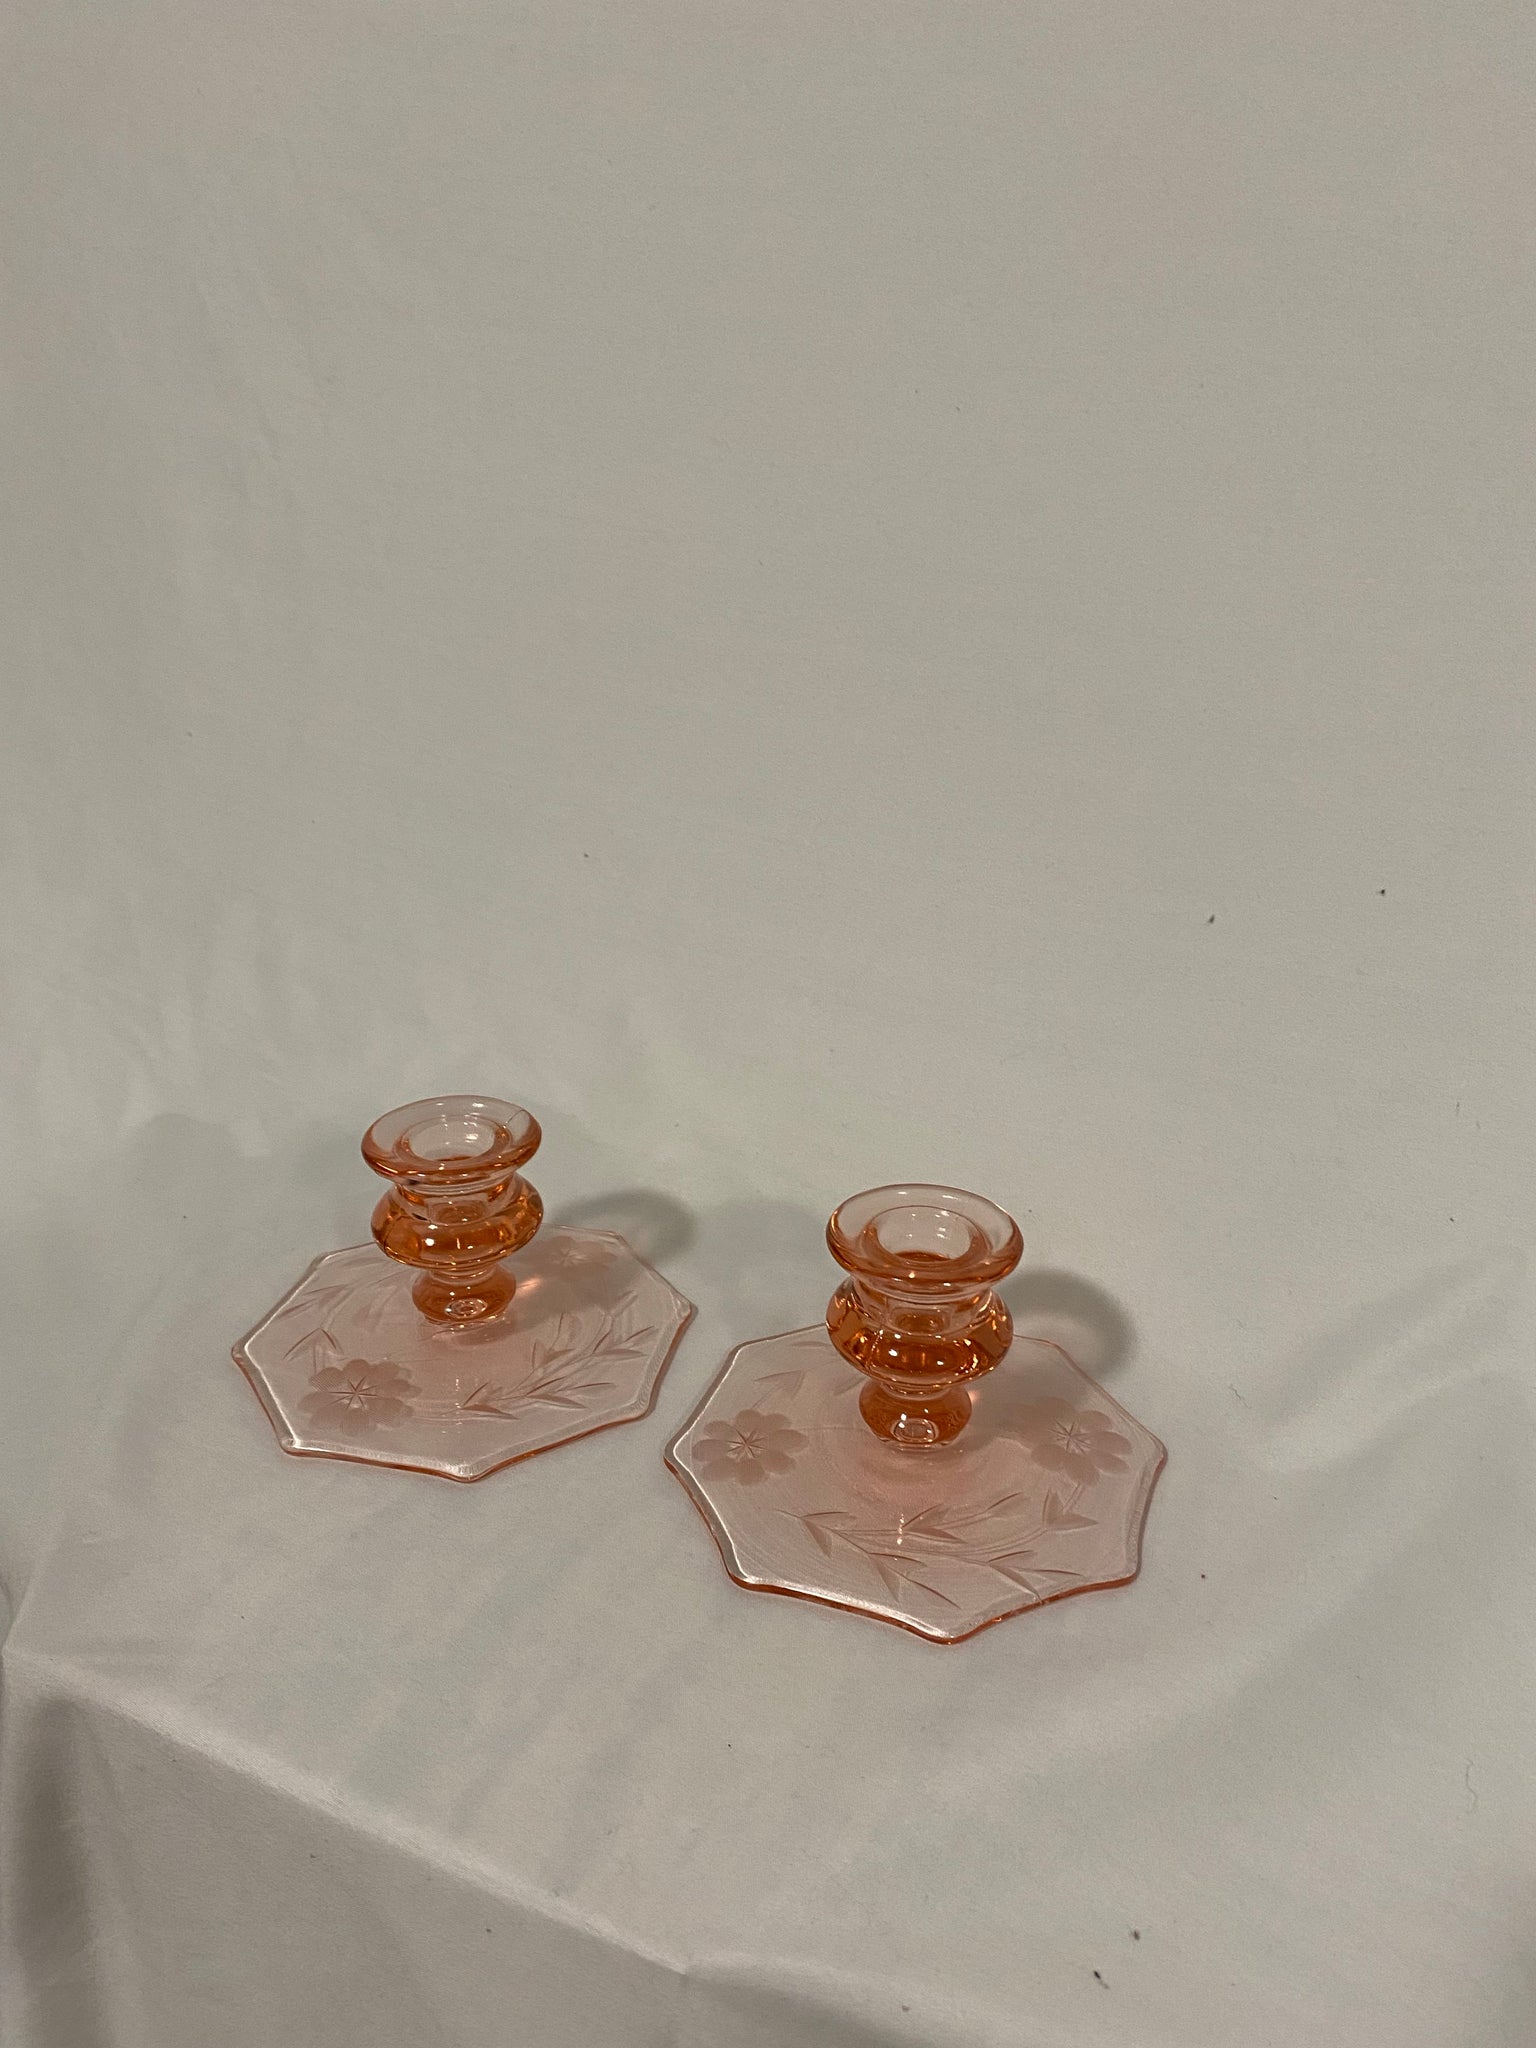 Pink depression glass style candle holders